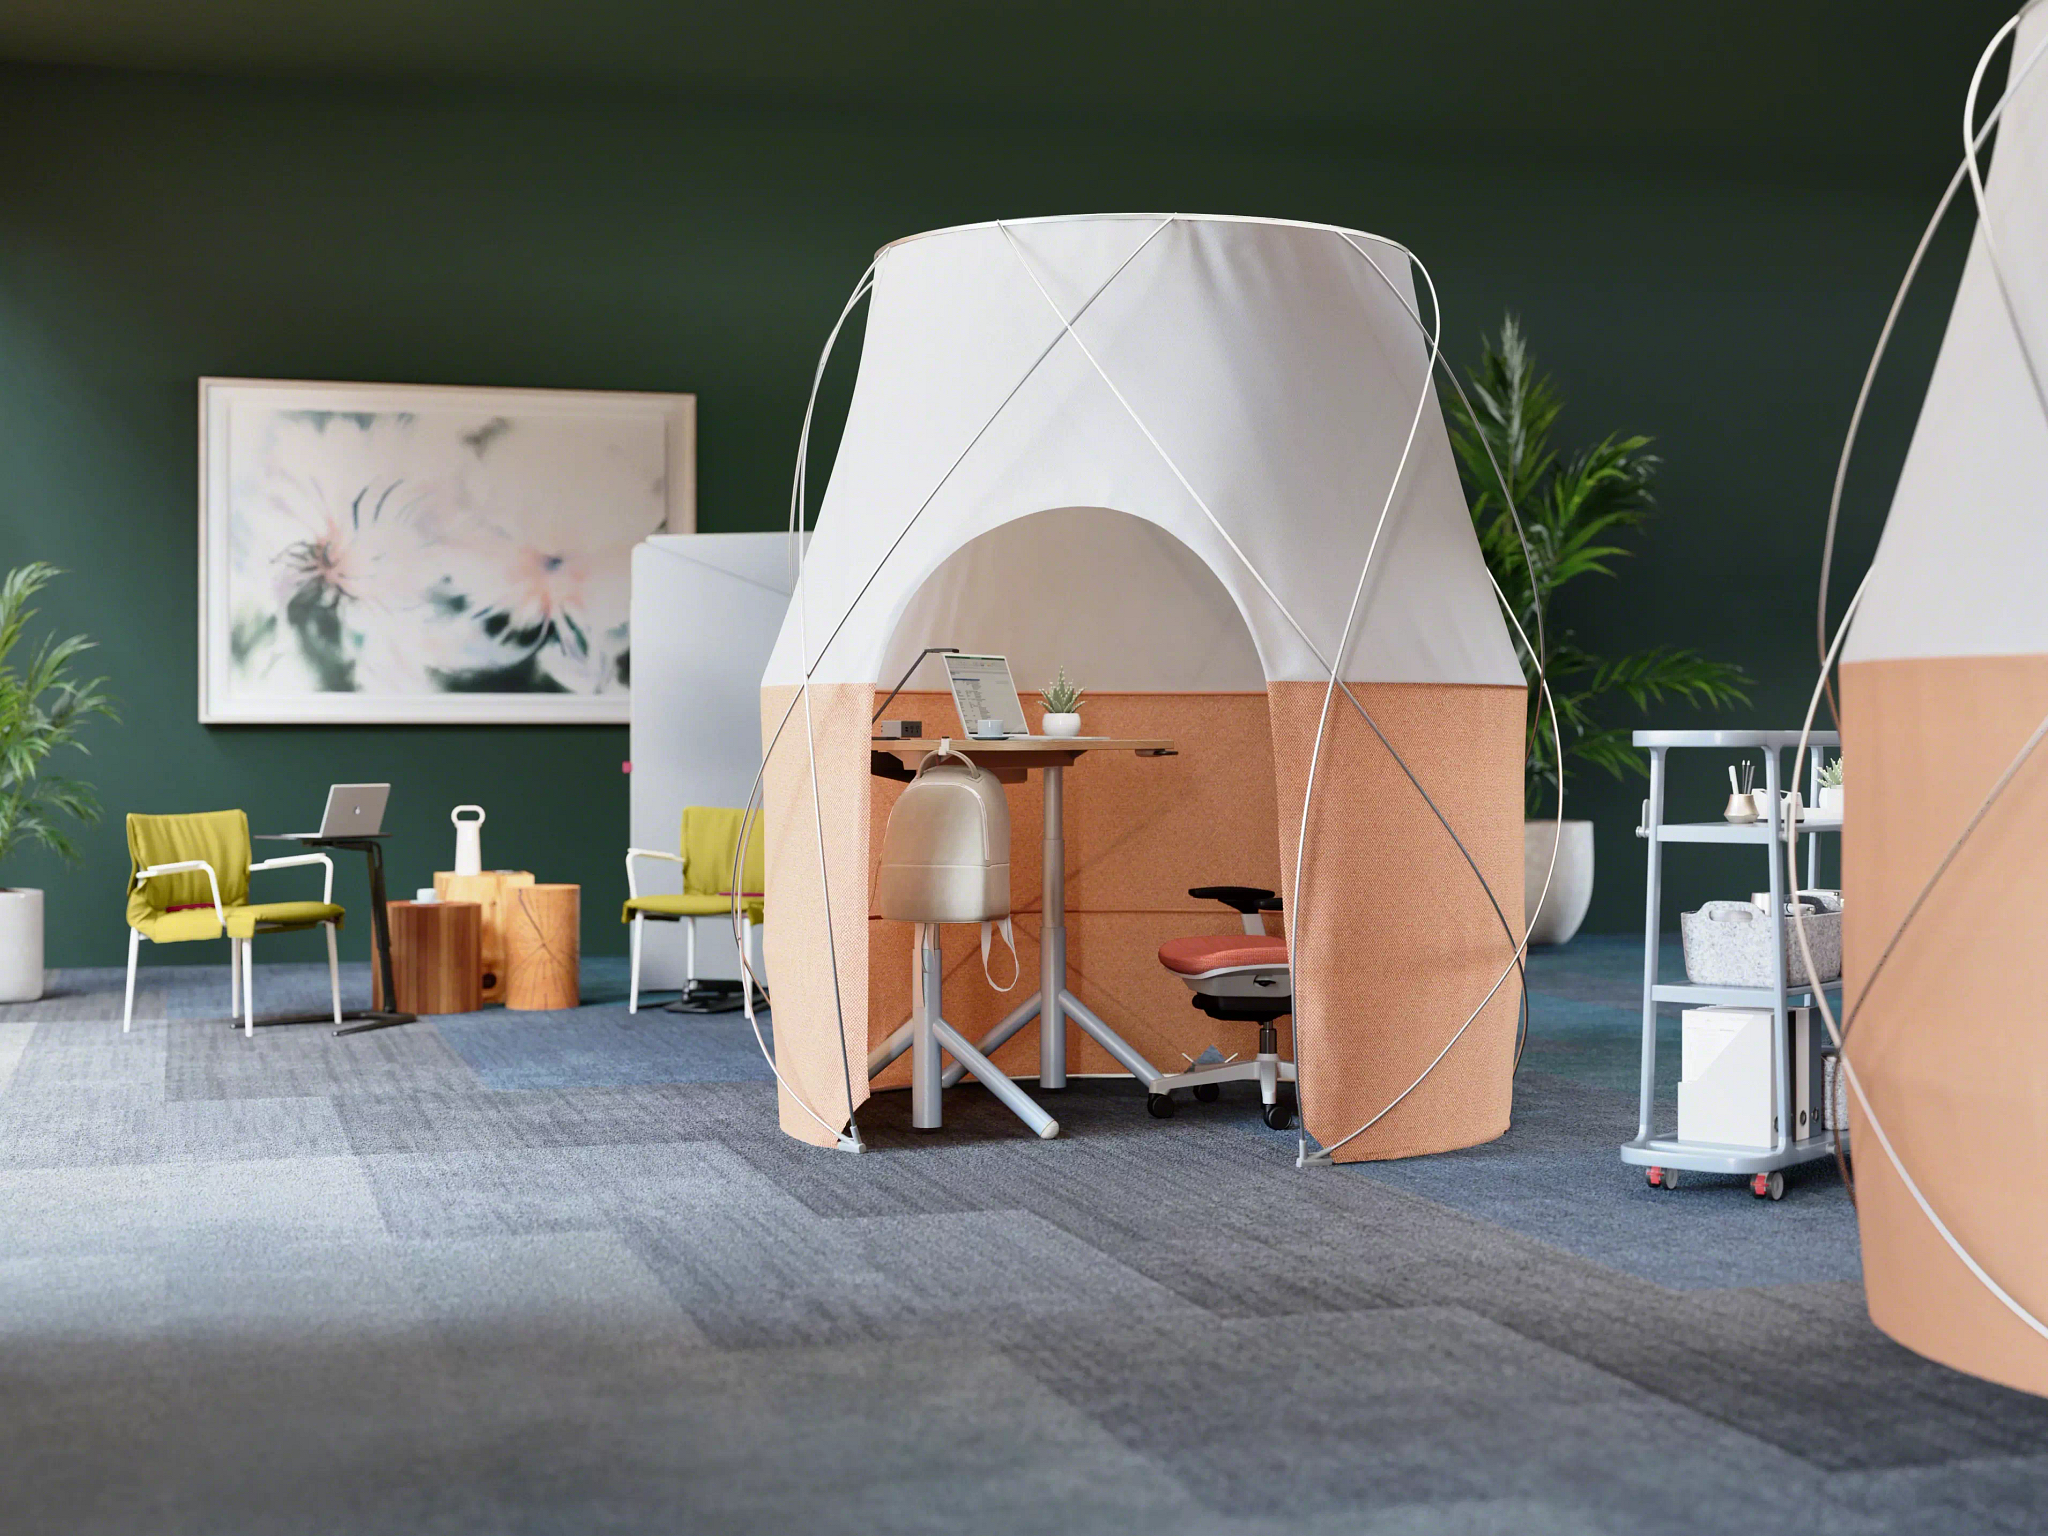 Is the Office Tent the New Cubicle? The Future of Work is at NeoCon 2021